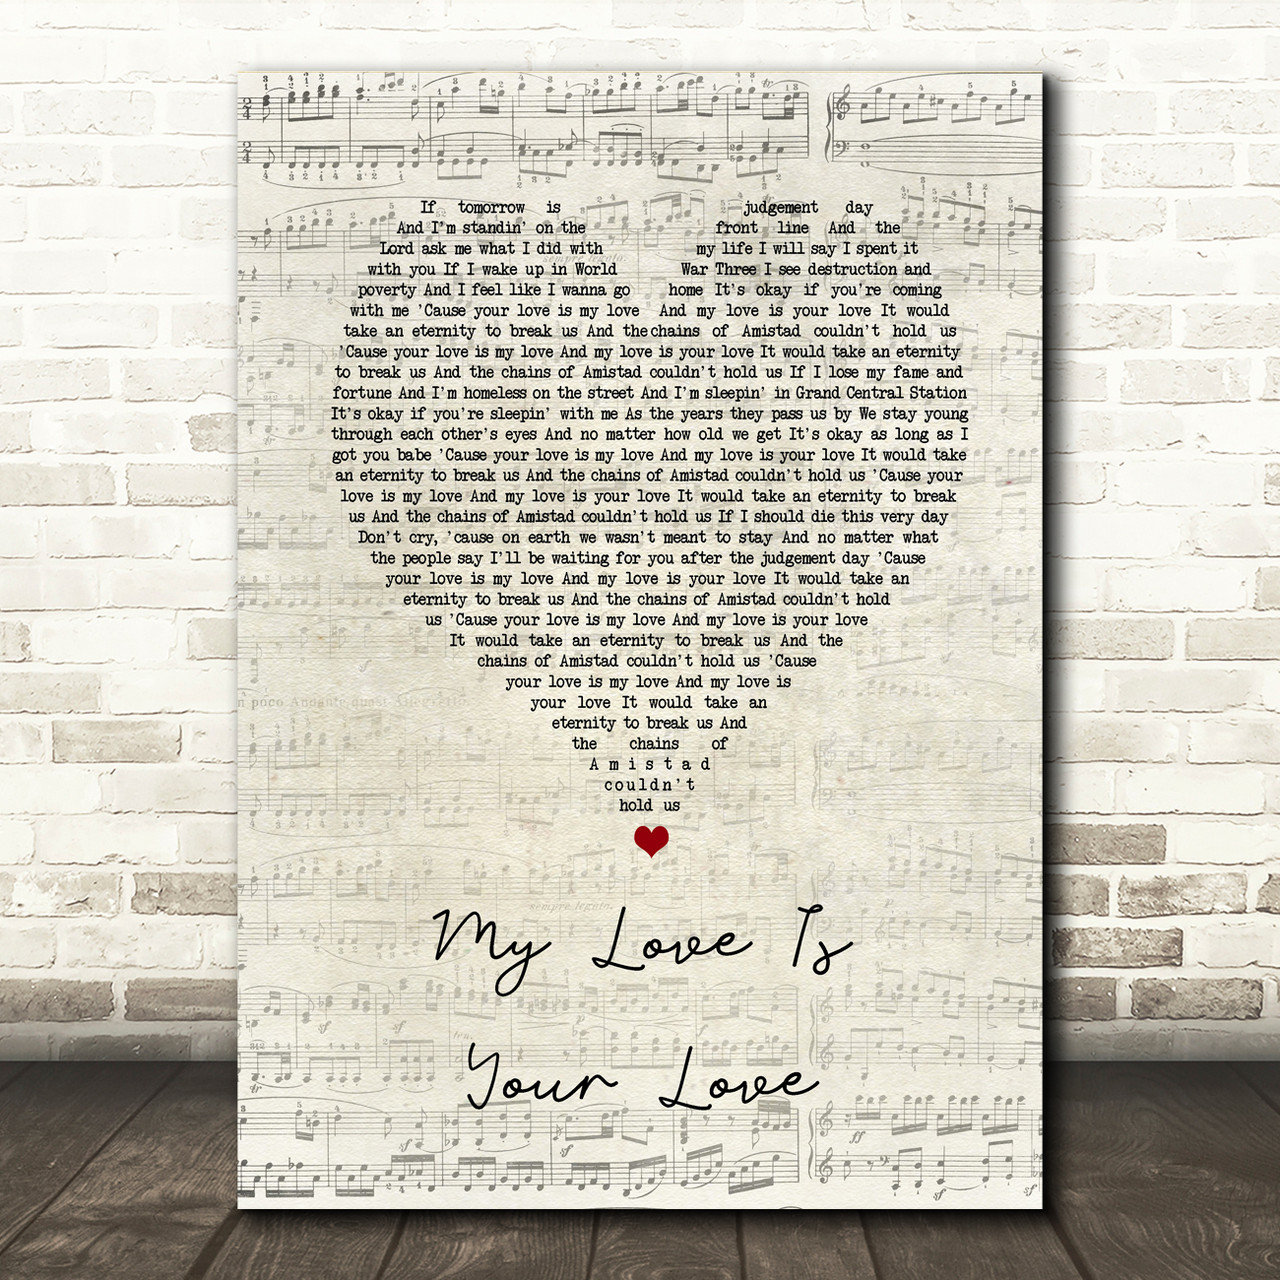 Love Song Lyrics for:My Love Is Your Love- Whitney Houston